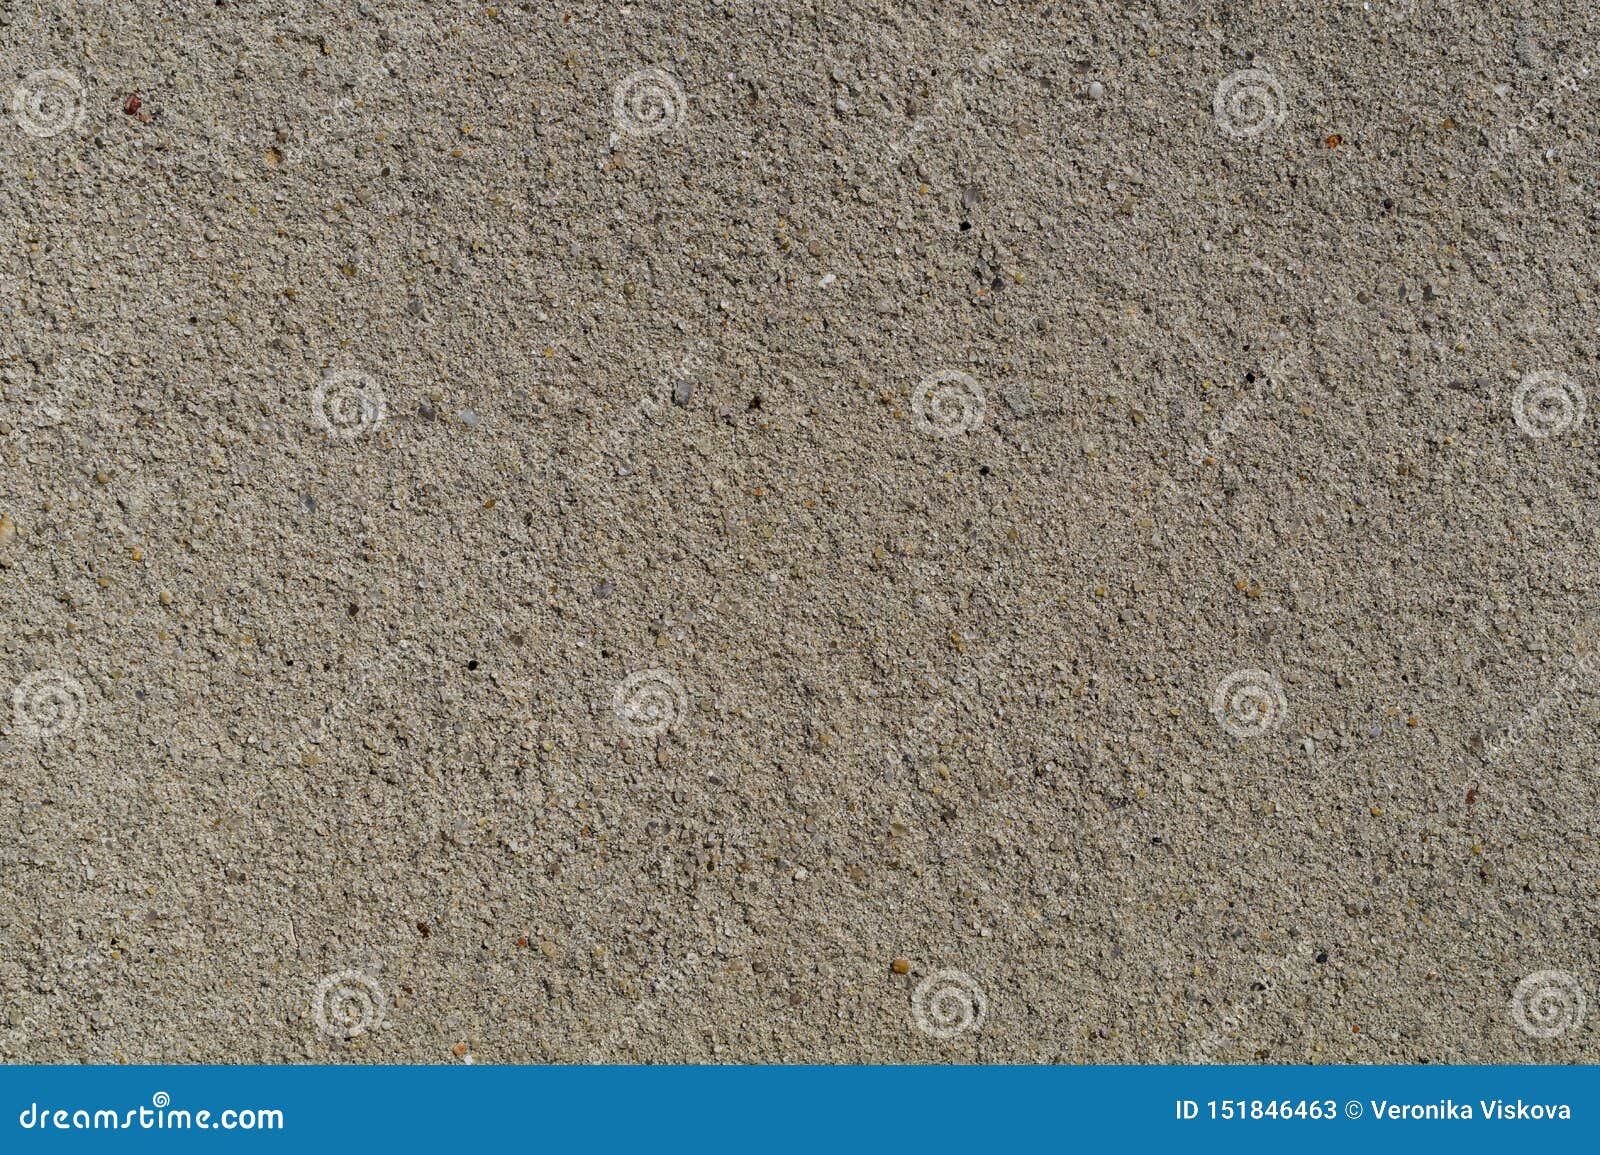 The Surface of the Cement is Small Gravel Mix for Design. Patterns of ...